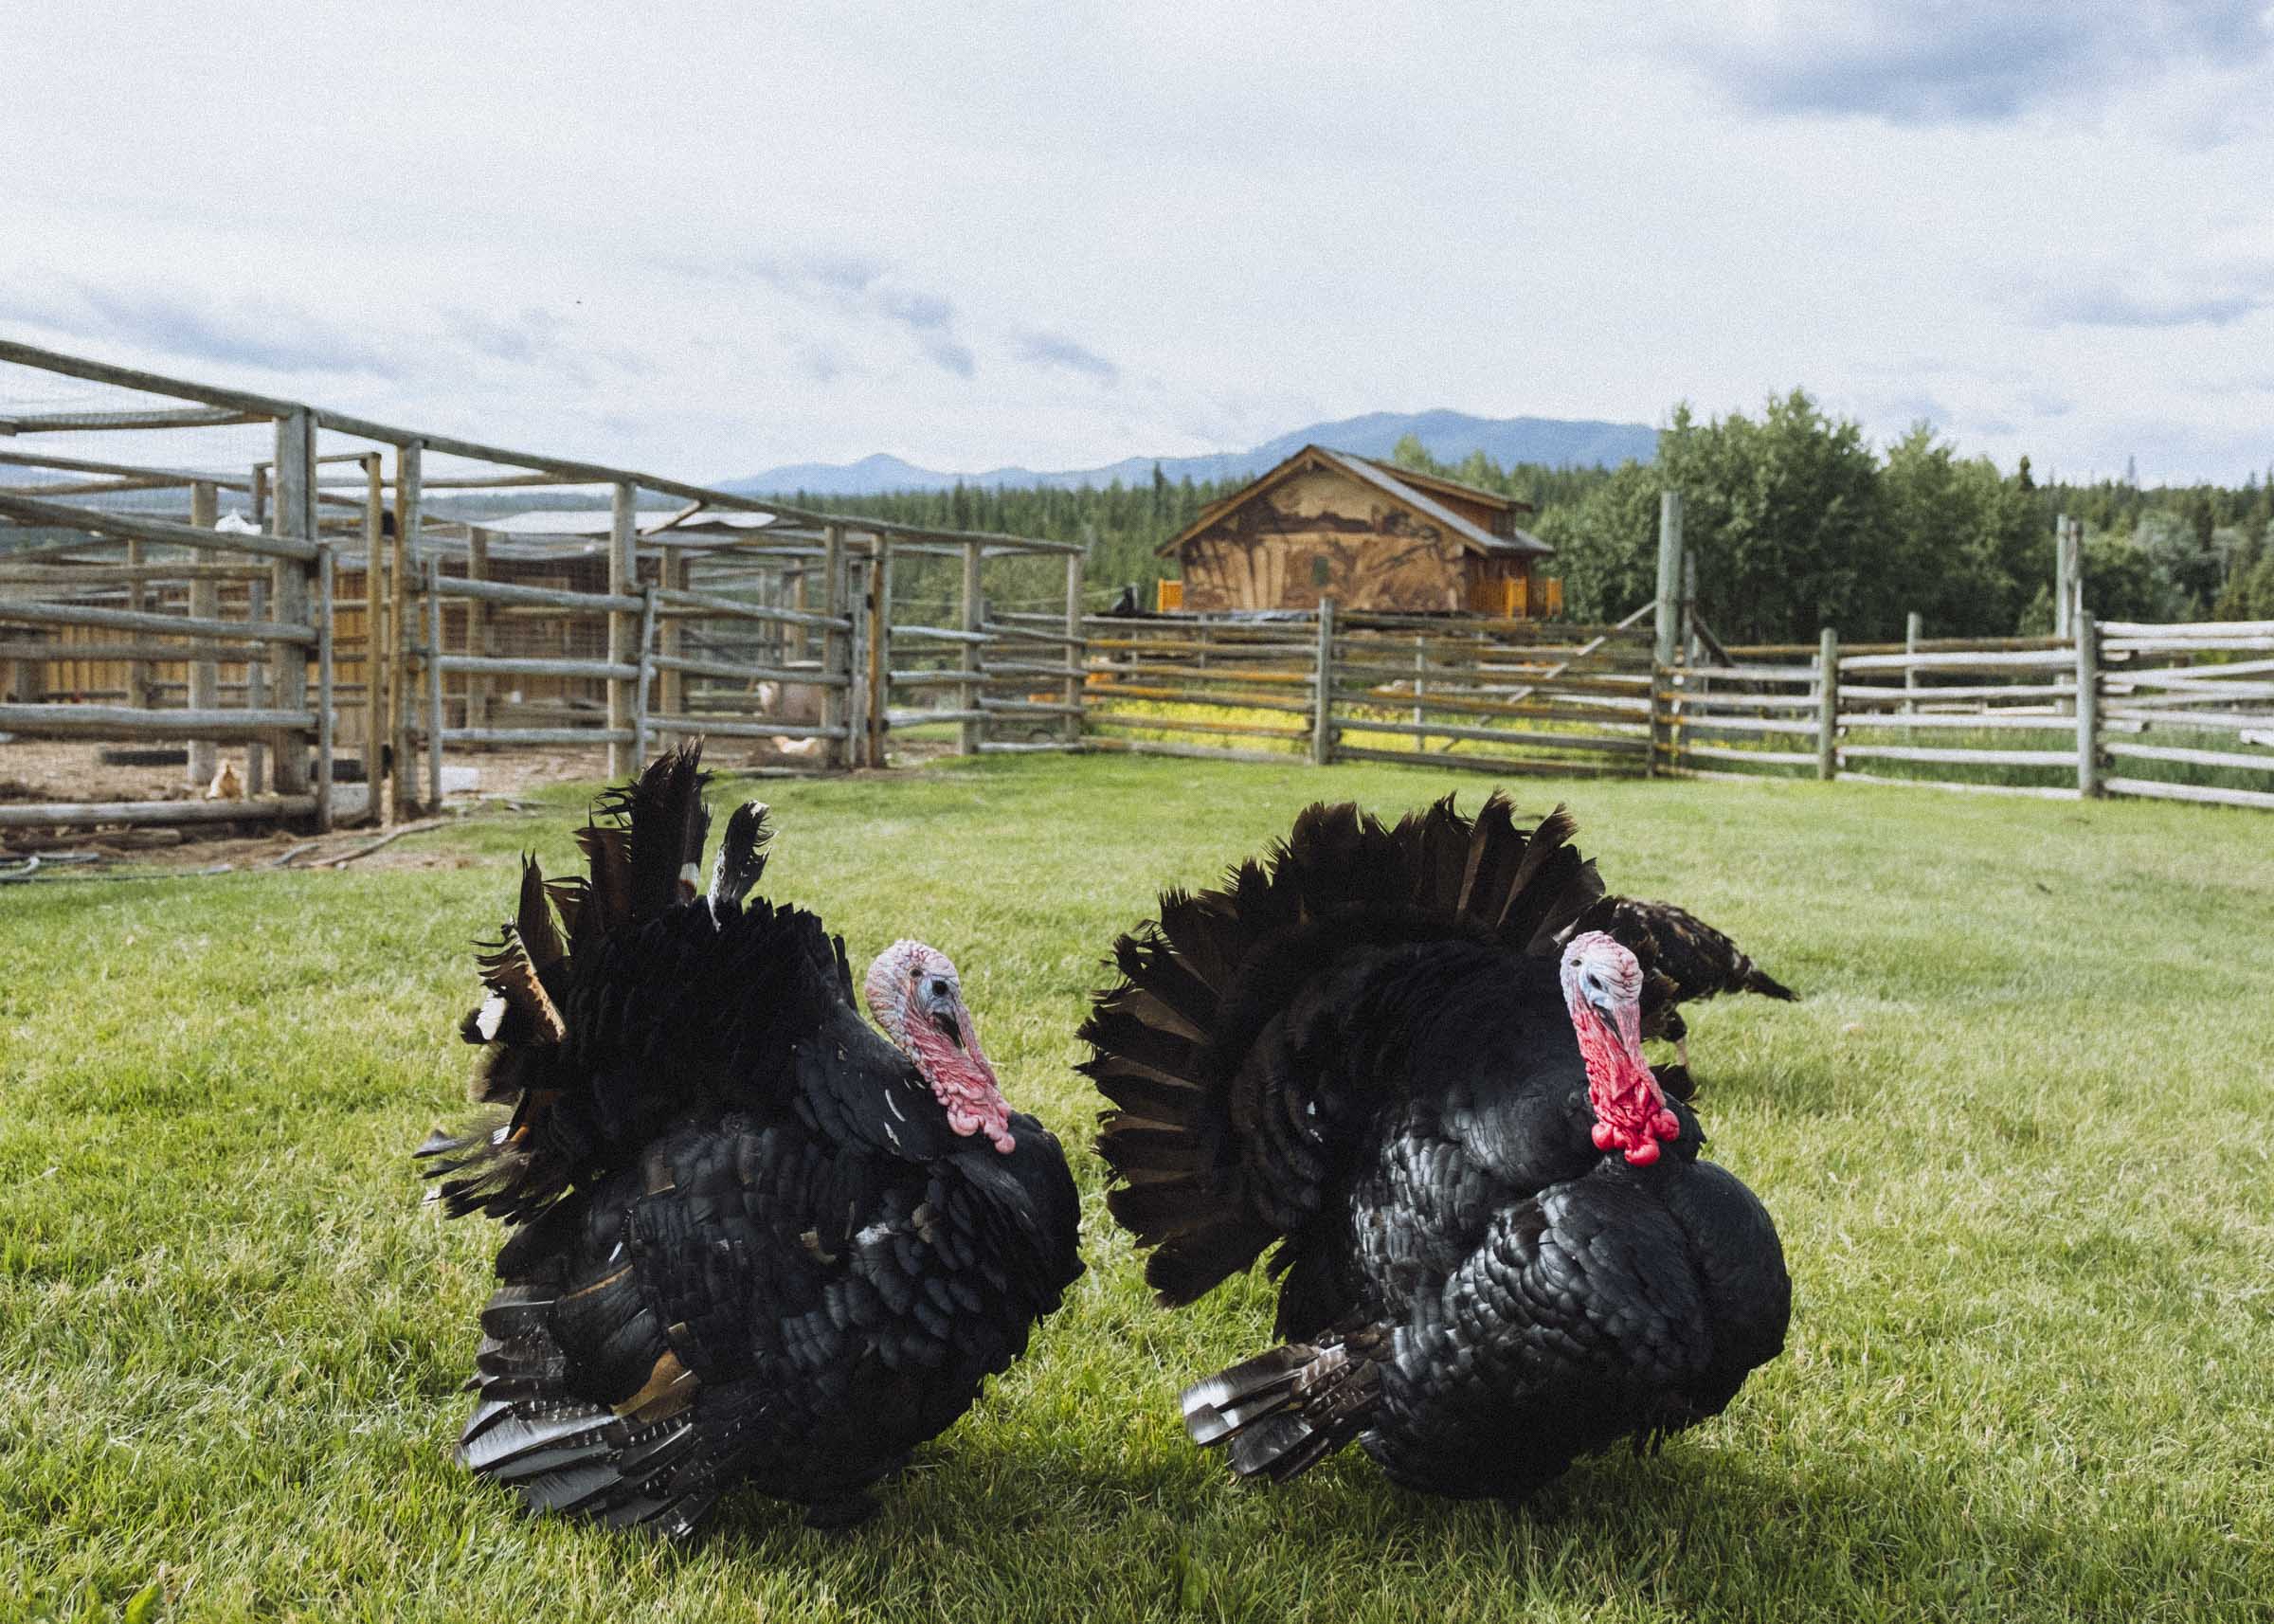 Two turkeys running the place